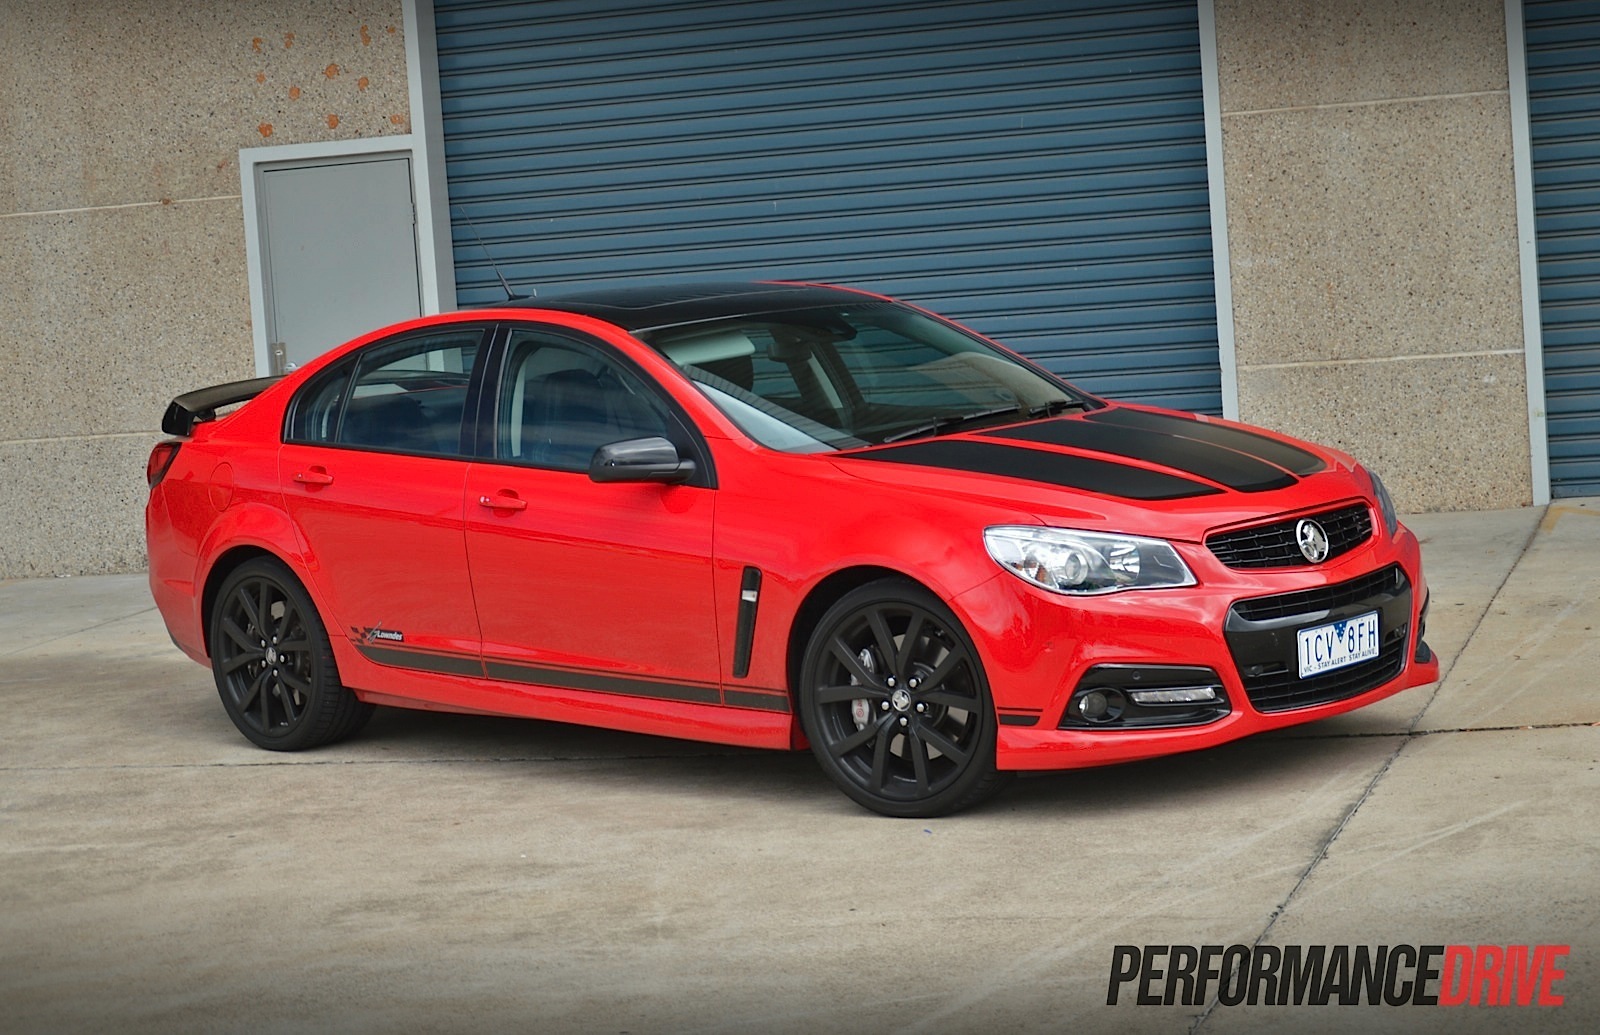 2015 Holden VF Commodore SS Craig Lowndes edition review (video)